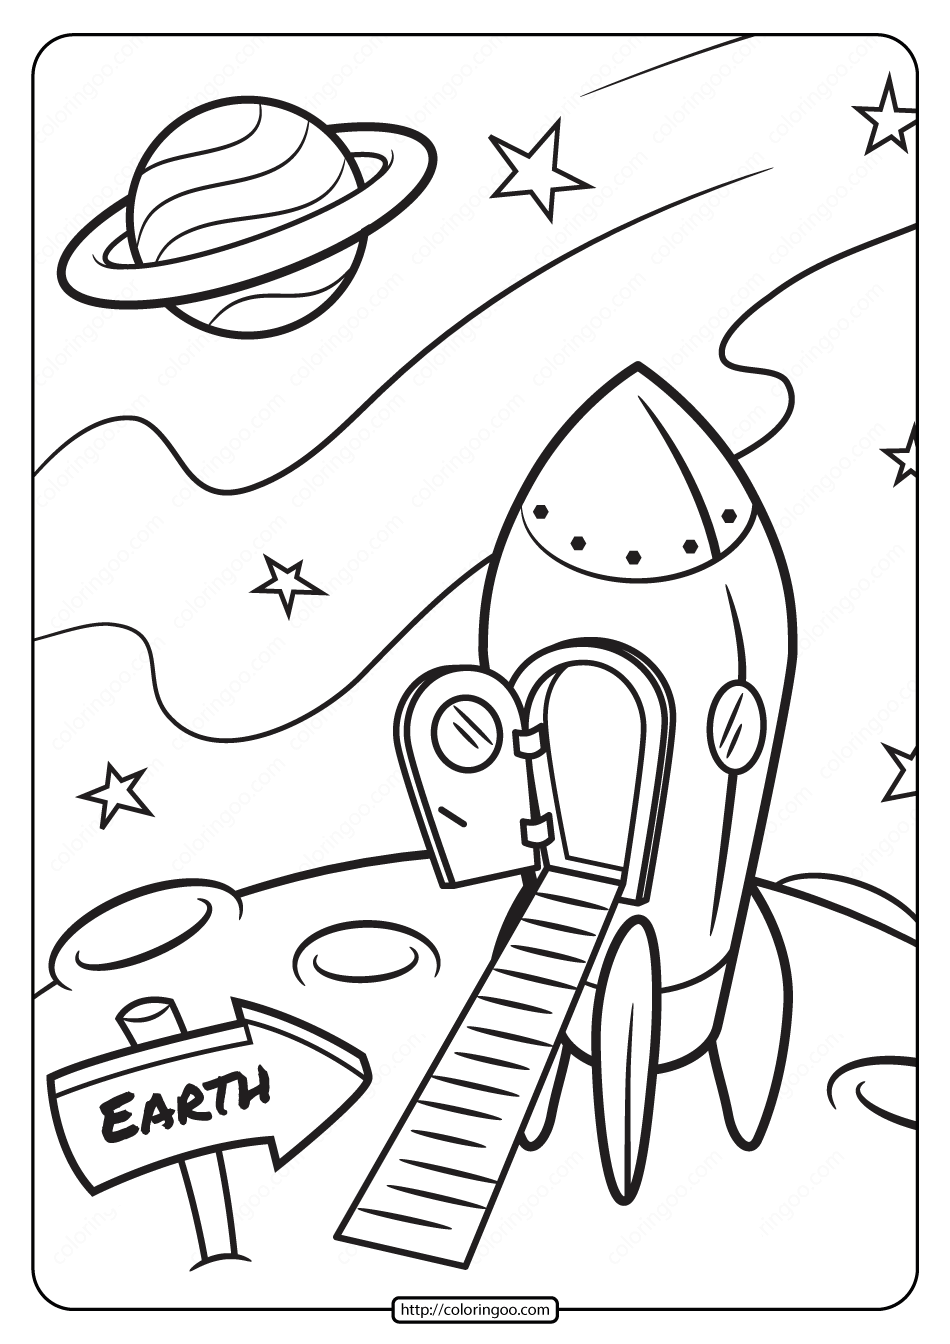 A Rocket on the Moon Surface Coloring Pages